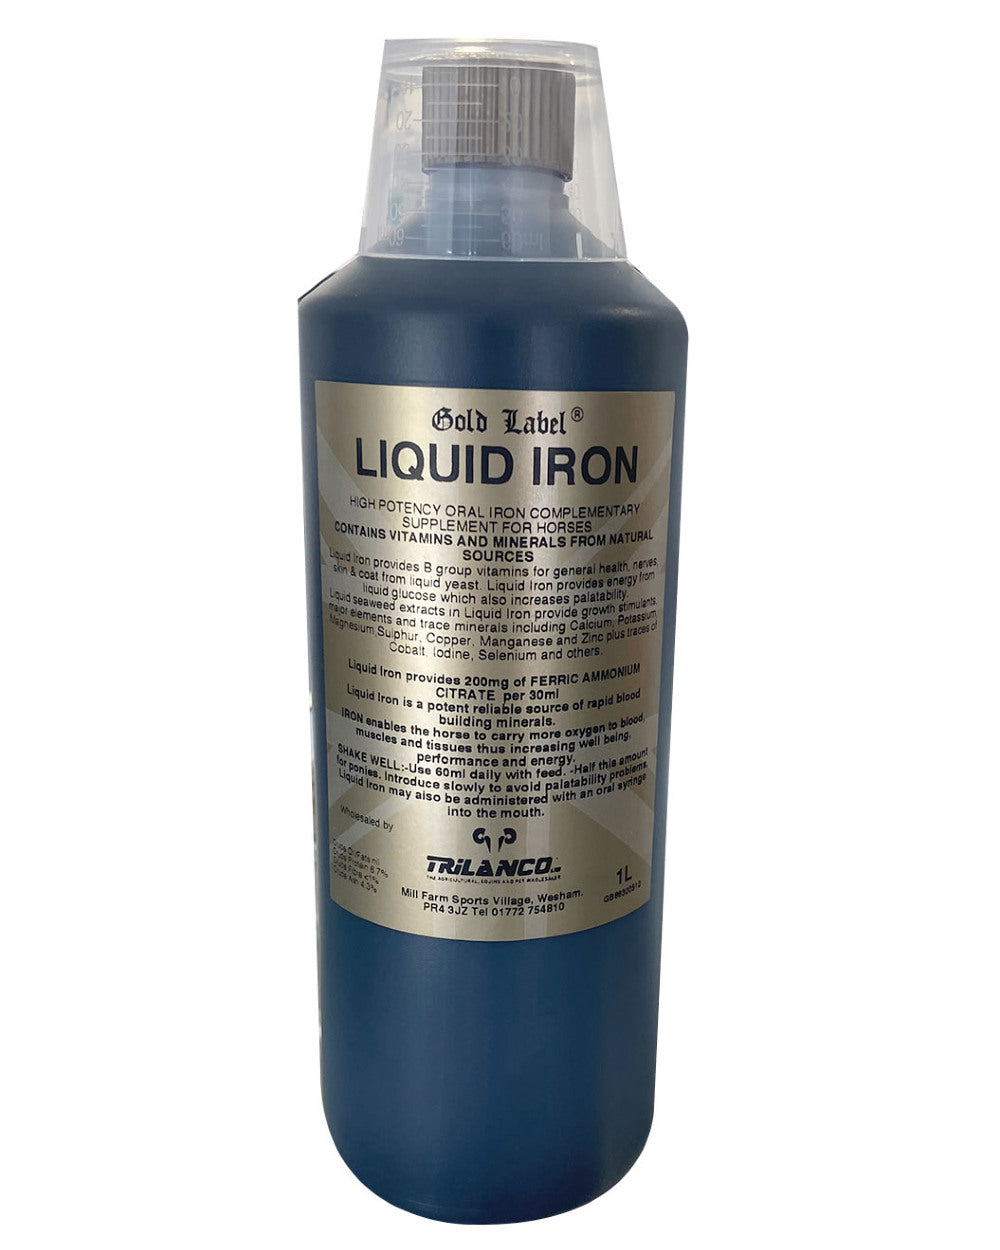 Gold Label Liquid Iron On A White Background